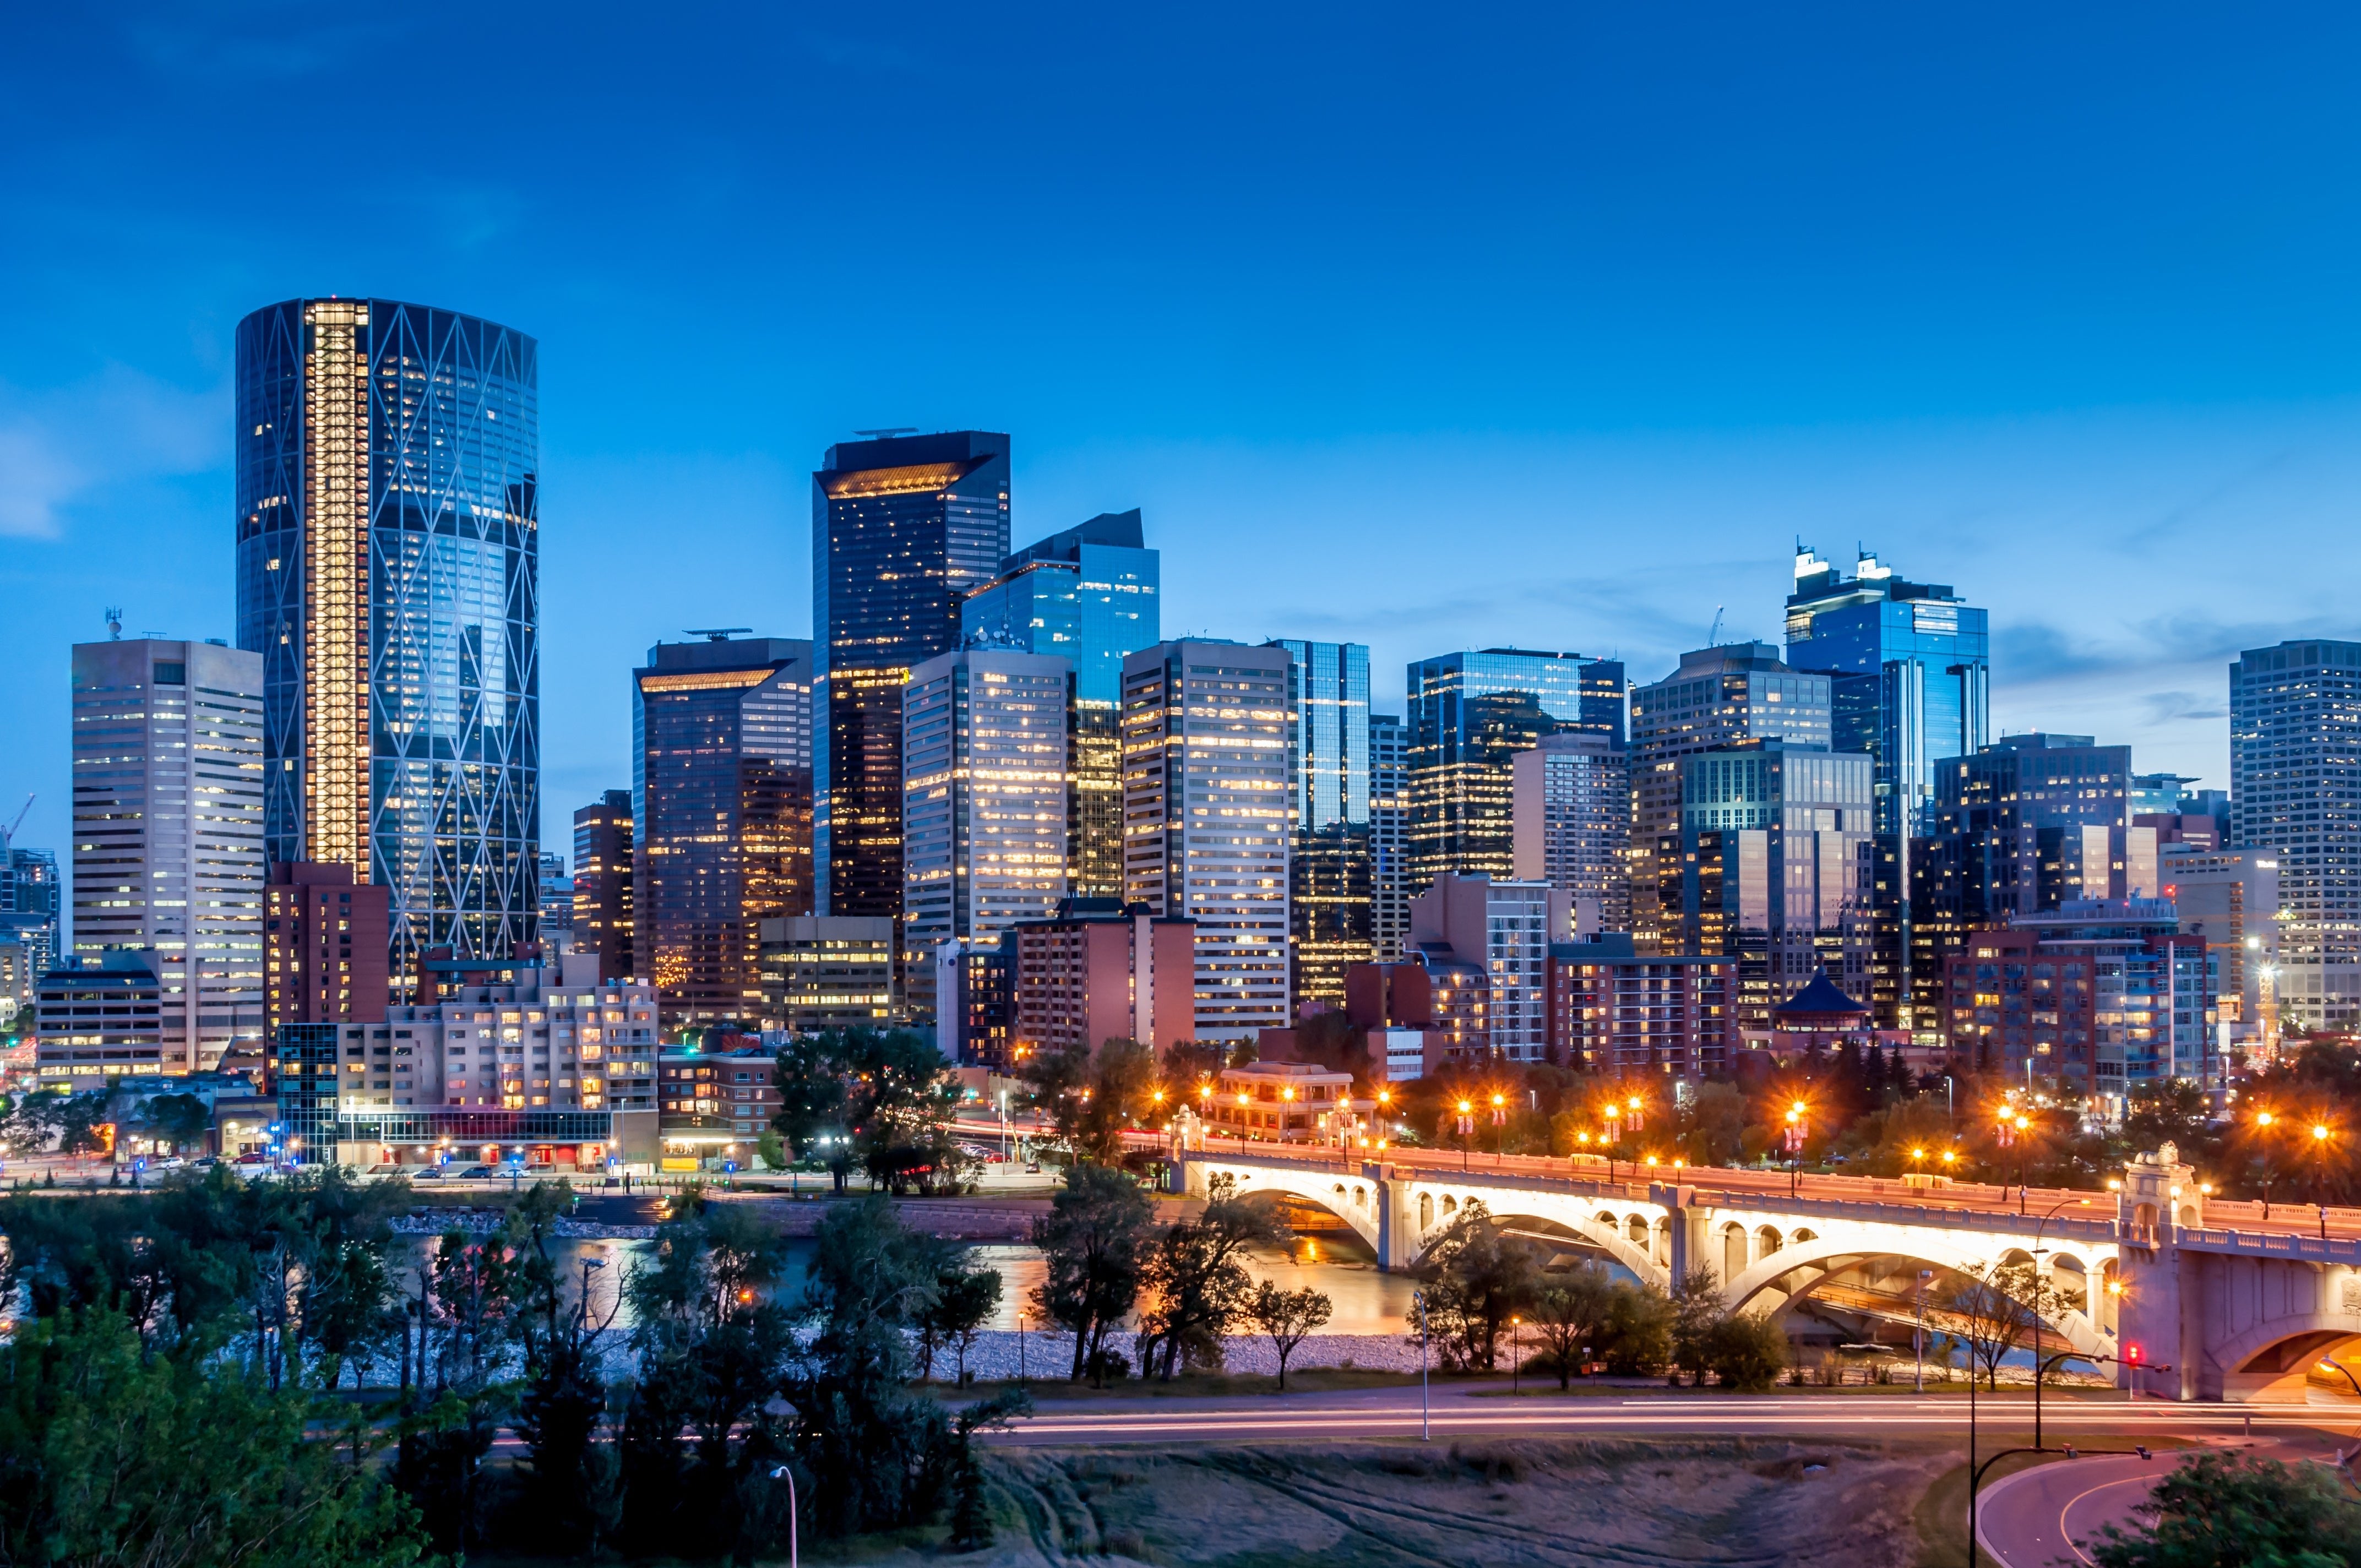 Calgary, The Vibrant City Where it All Started